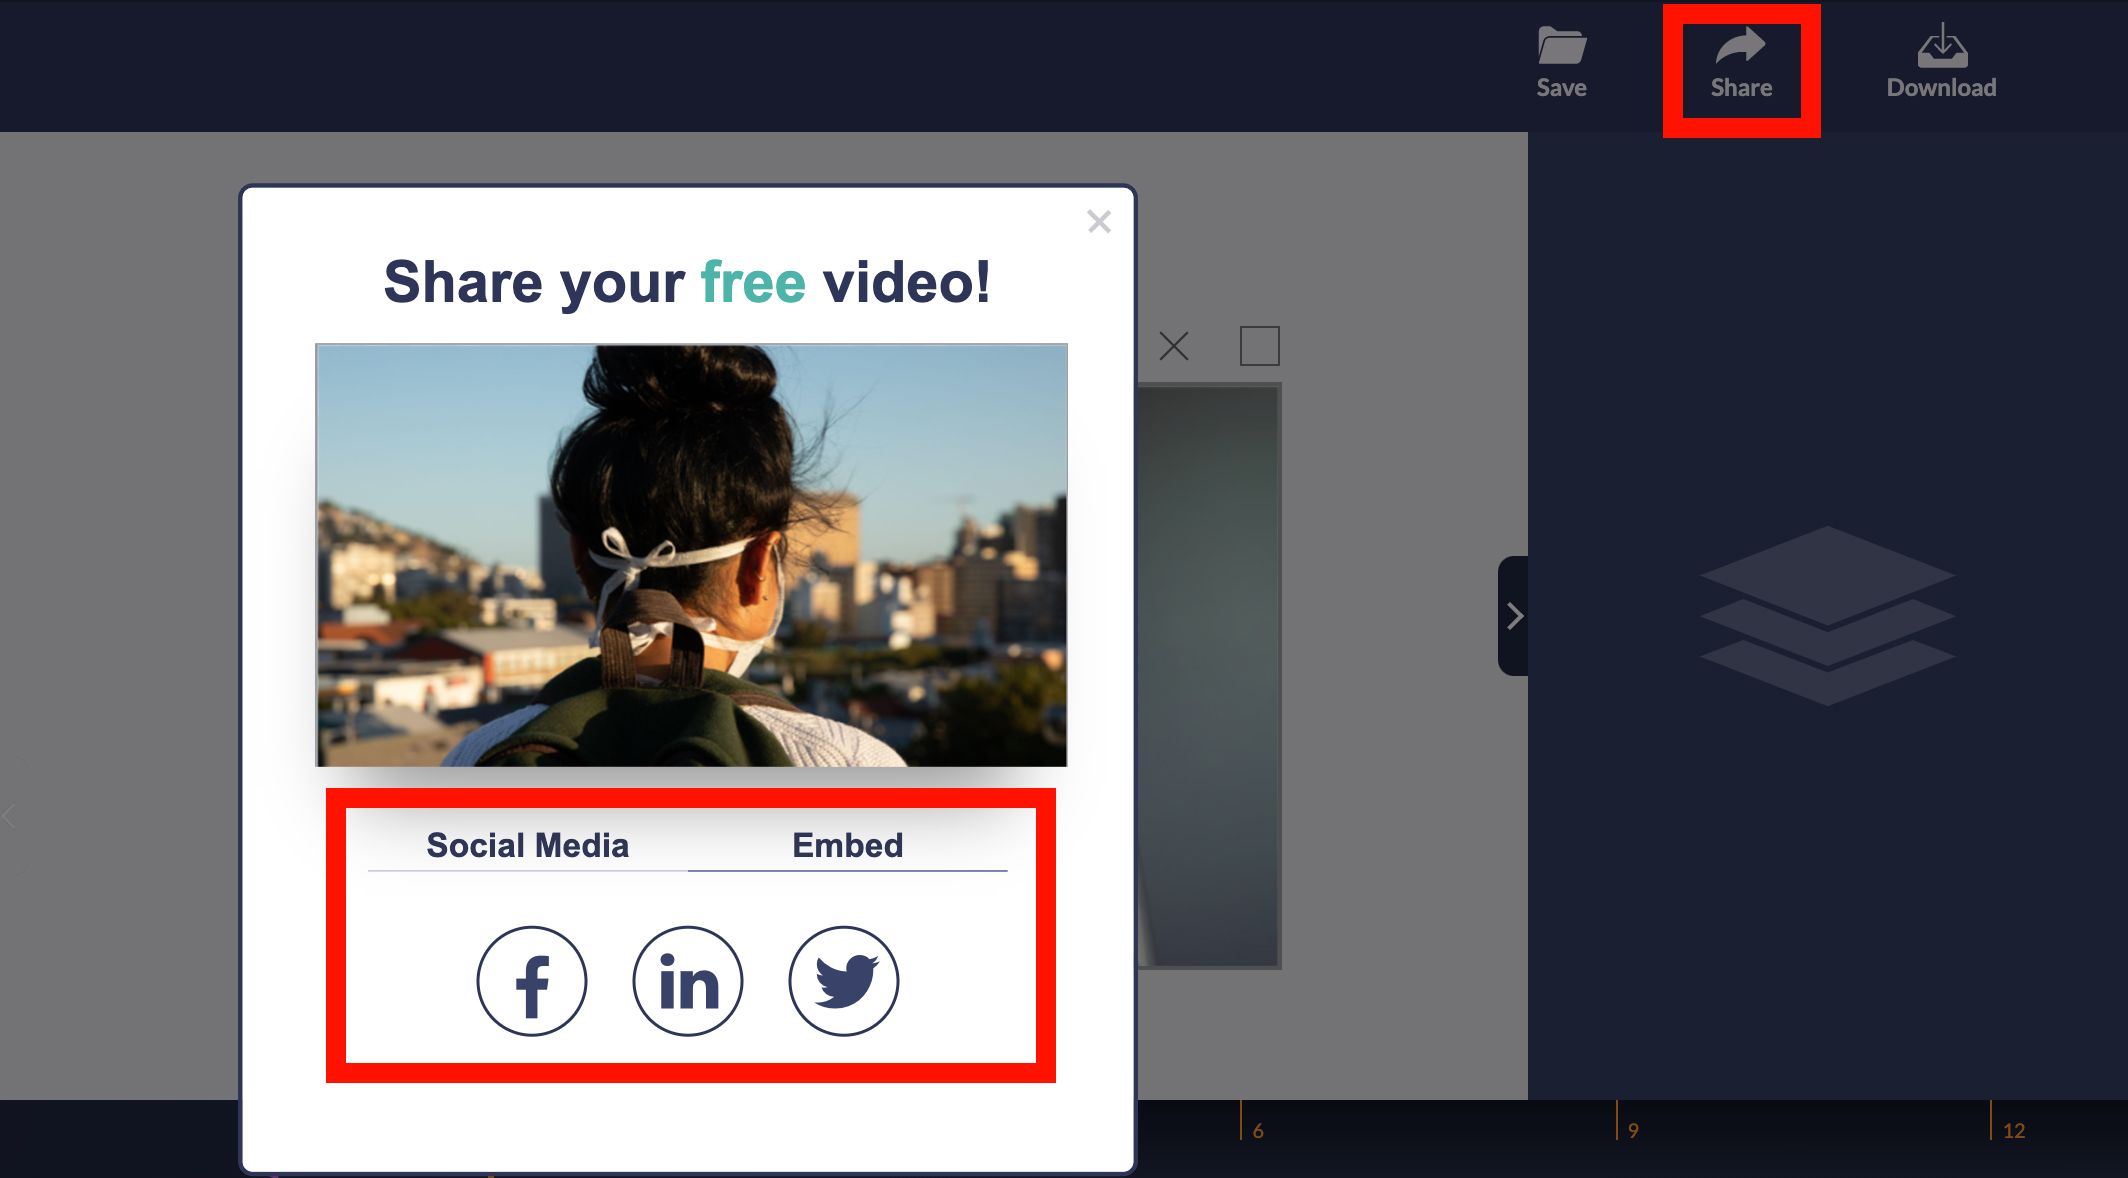 Share options on Design Wizard, with social media icons - Step-by-step guide on how to make a video from photos with the Design Wizard - Image